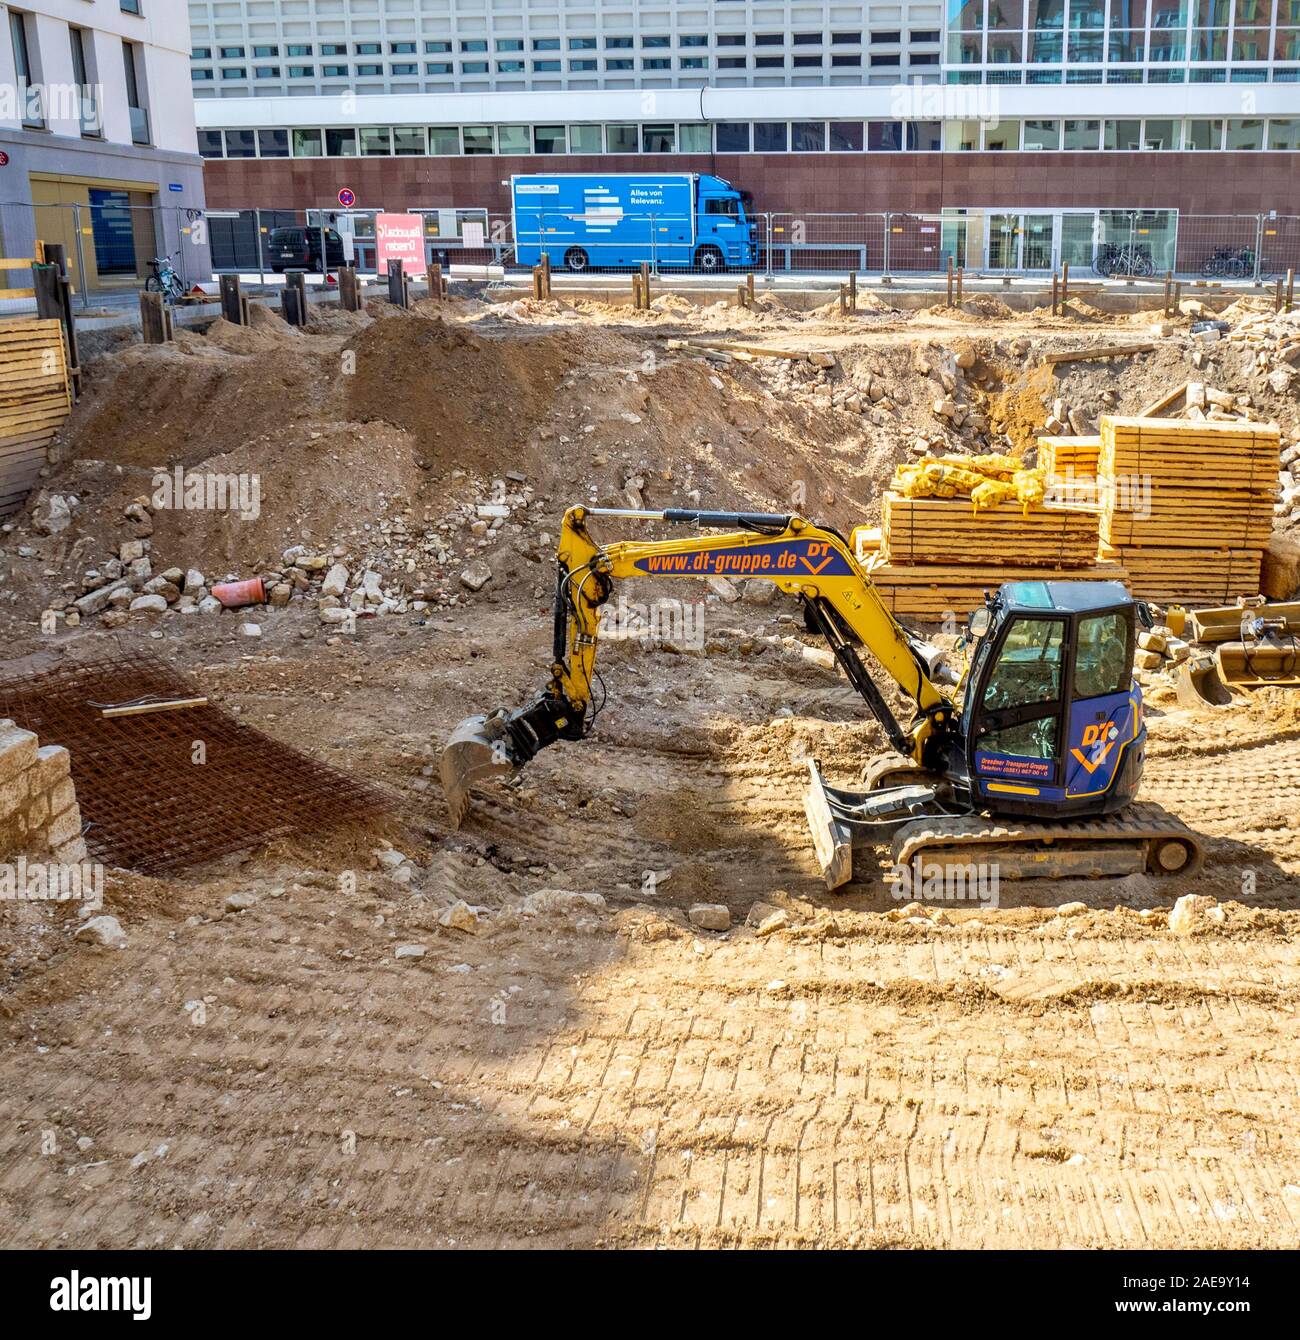 Excavator in building site in central Dresden Saxony Germany. Stock Photo